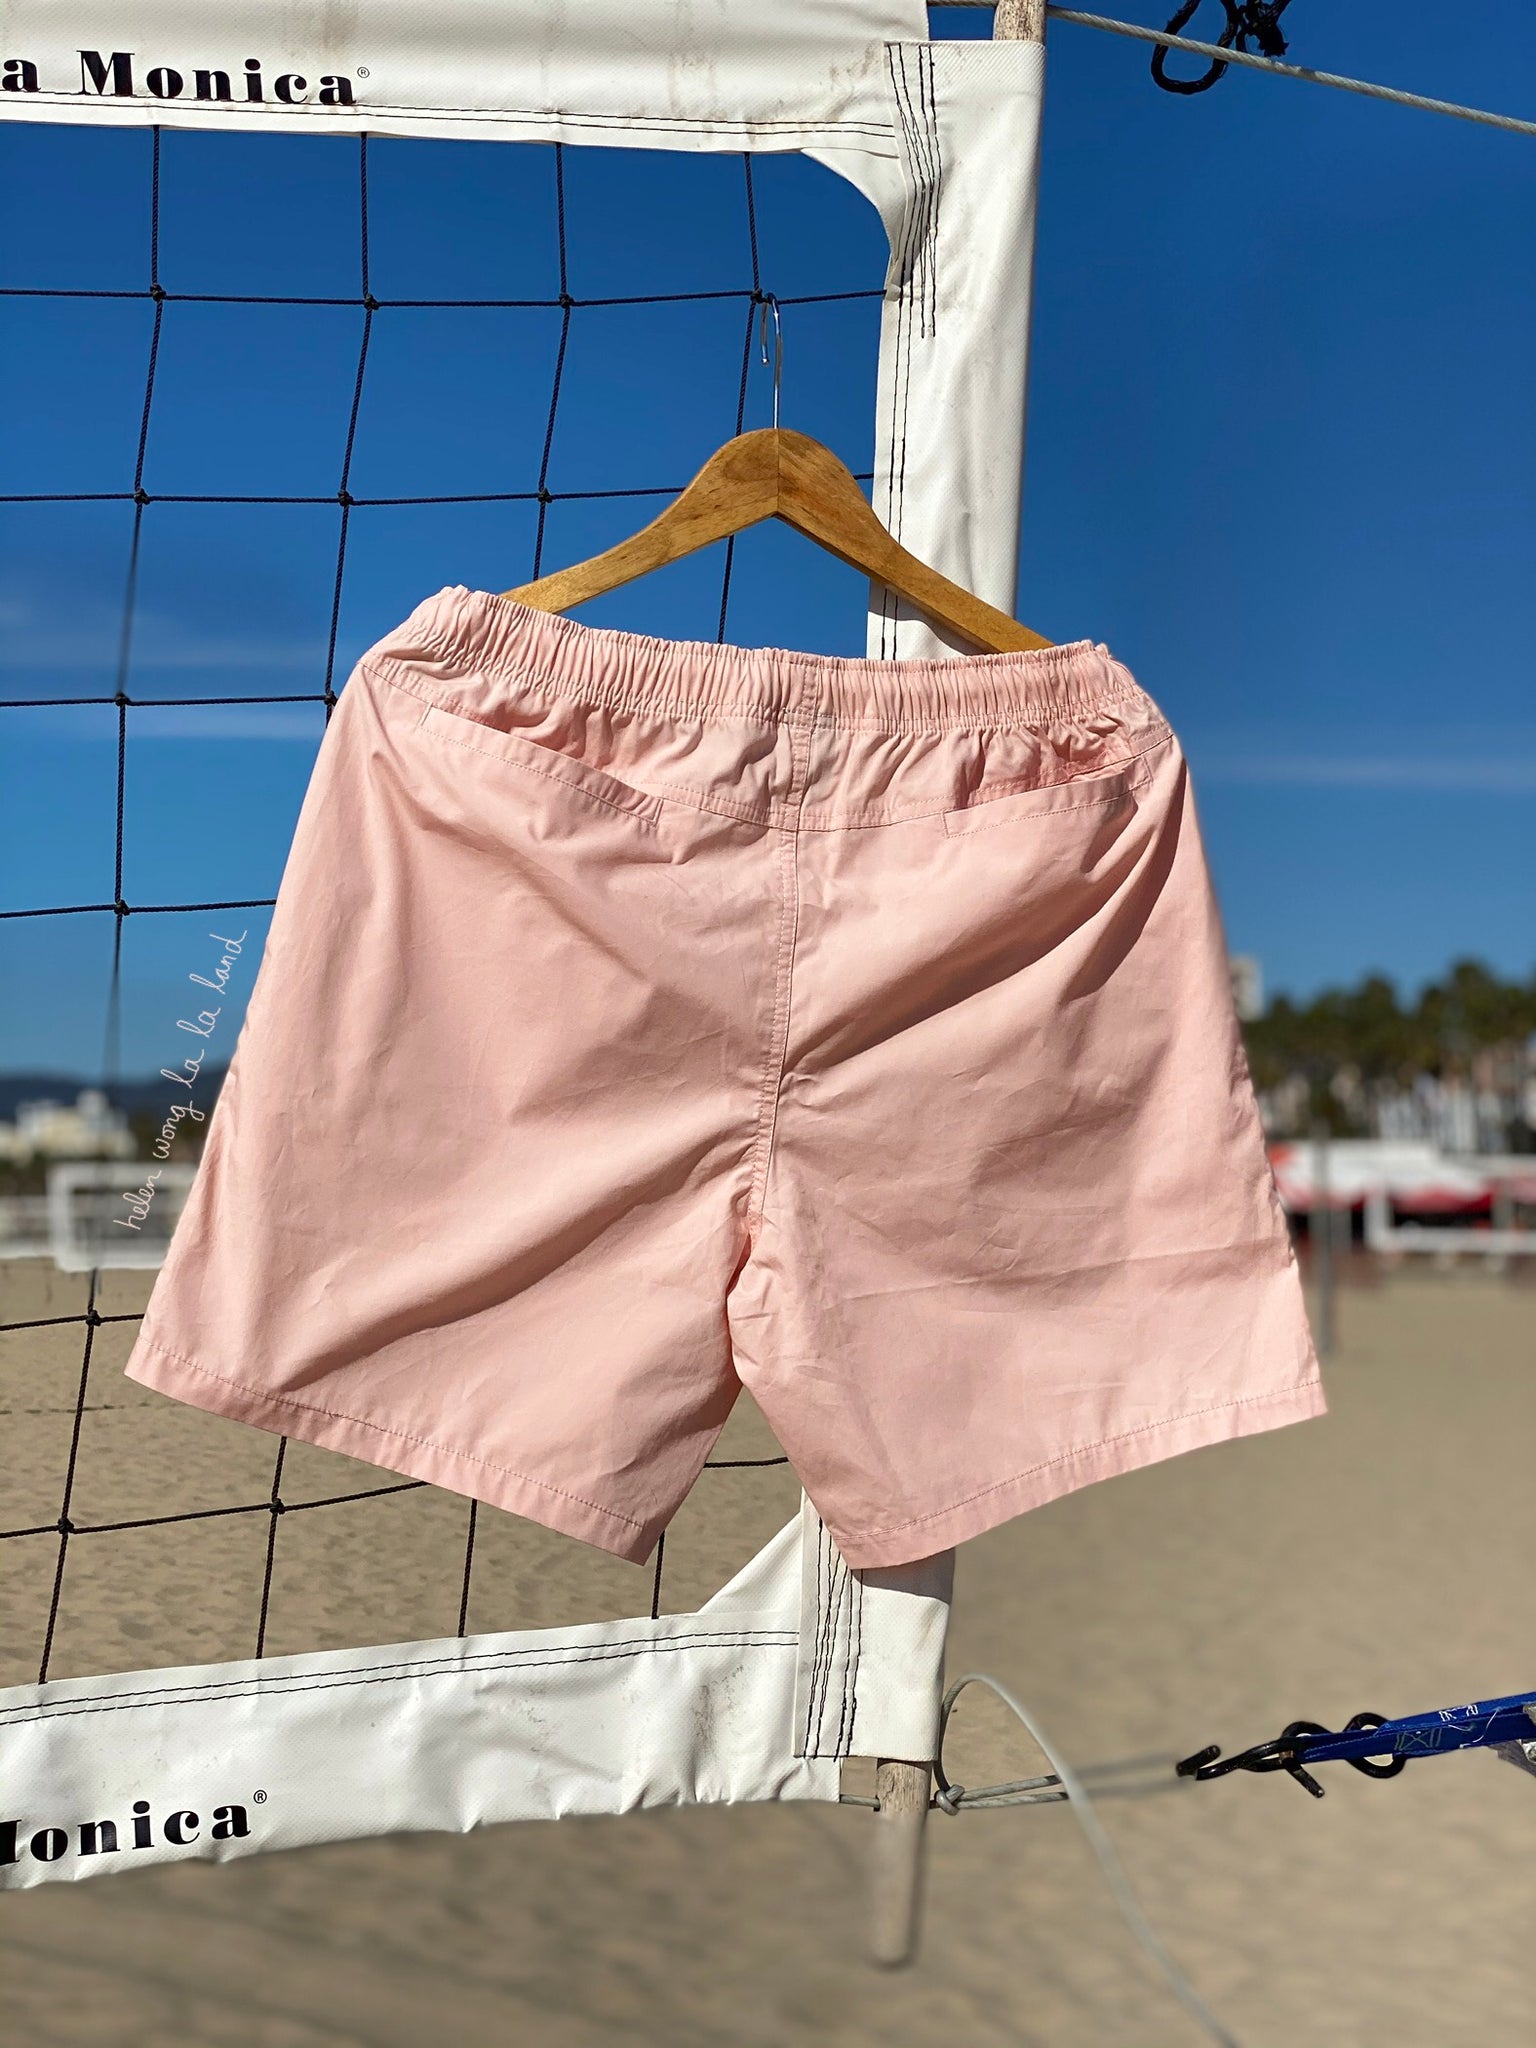 (S/S 2020) ✌🏼Vegan Hawaii beach shorts in PALE CORAL PINK